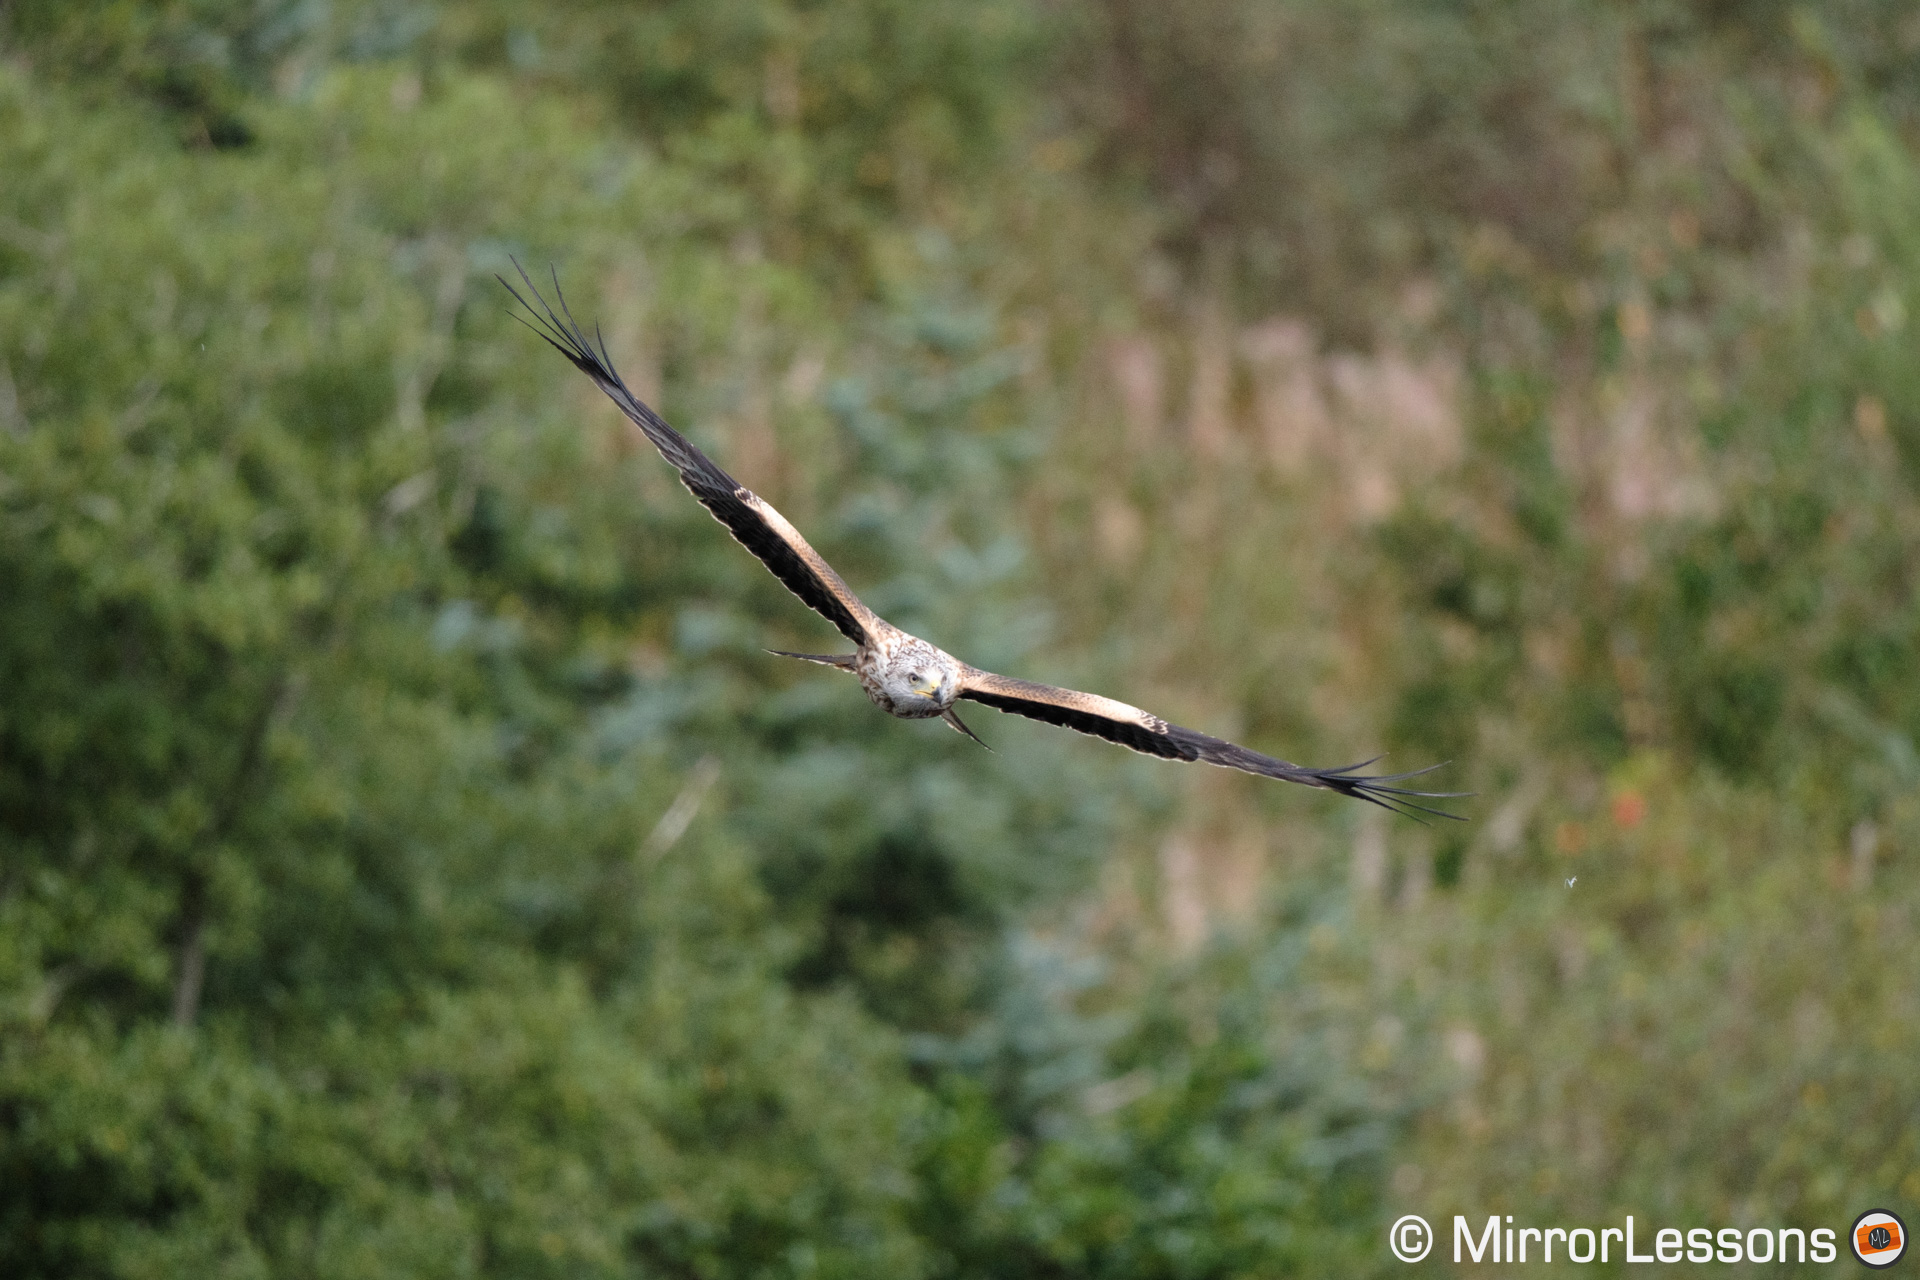 Red kite in flight with trees in the background